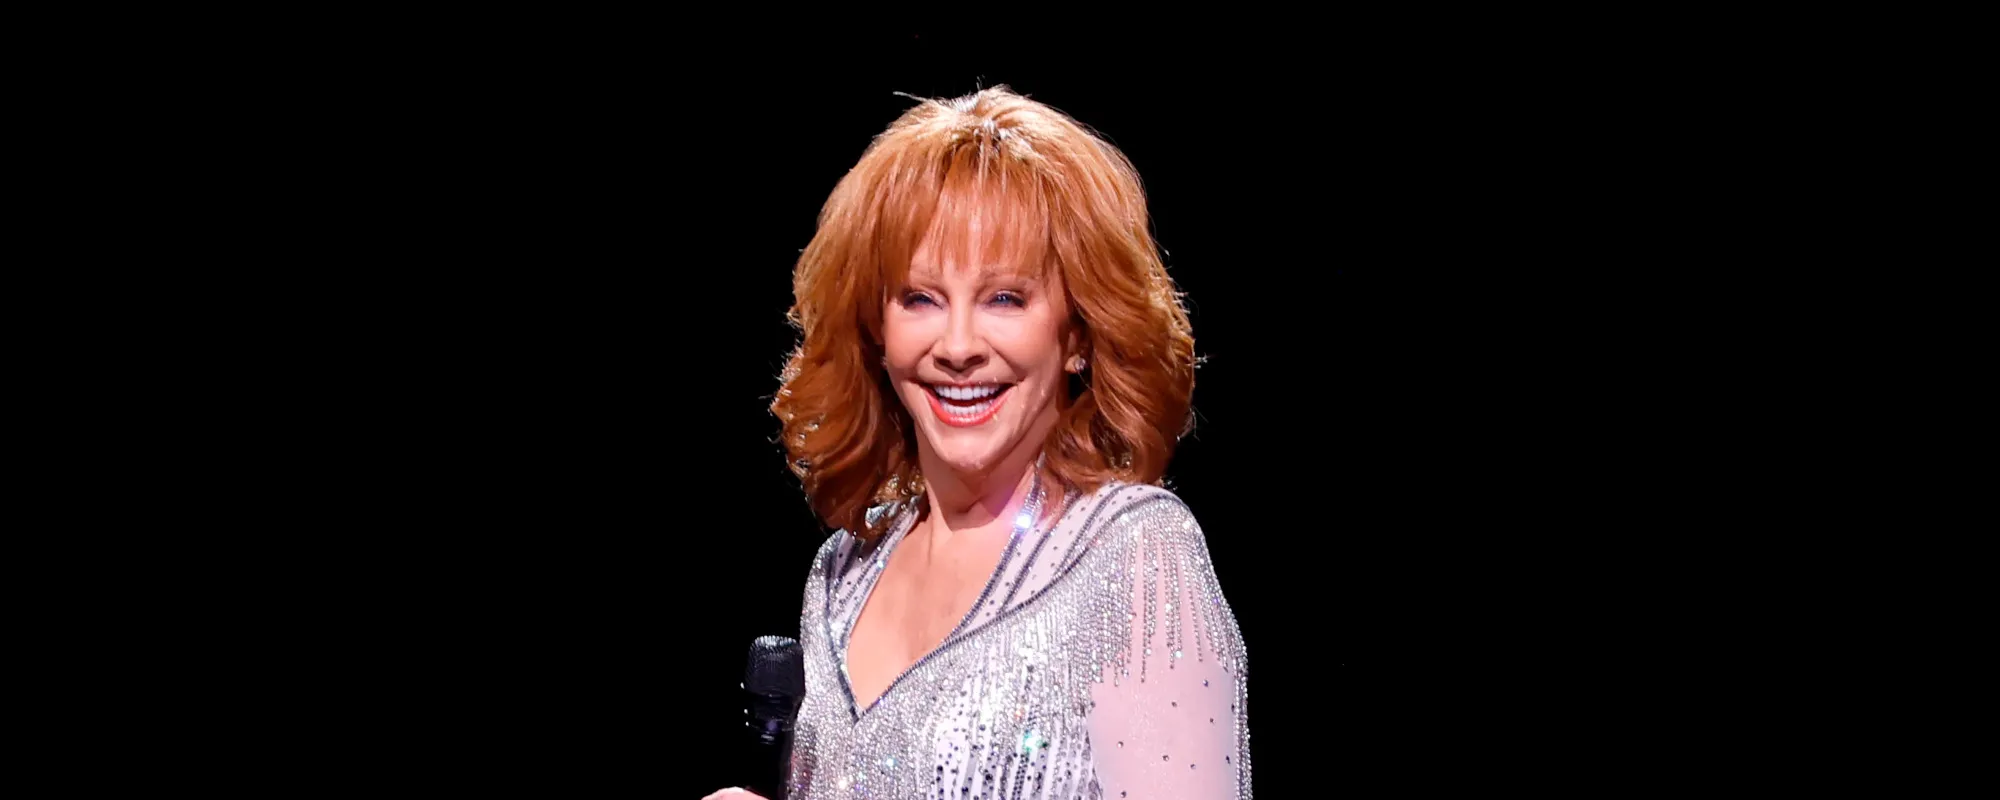 Reba McEntire Releases Acoustic Album ‘Not That Fancy’ Ahead of New Lifestyle Book